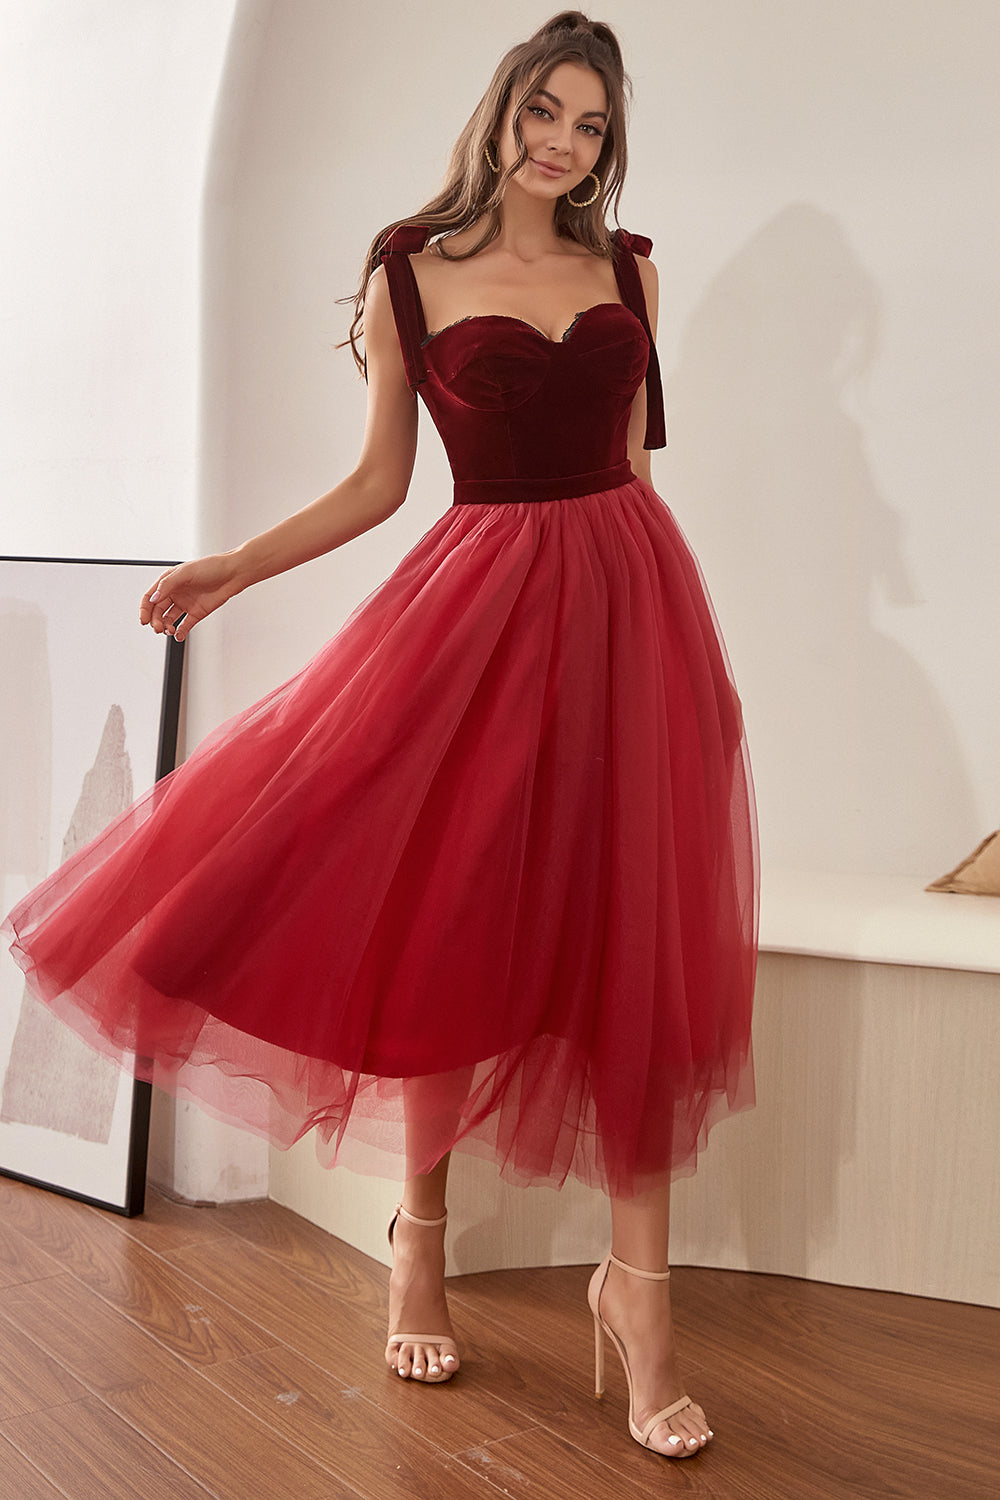 Burgundy Tulle Graduation Dress with Bowknot